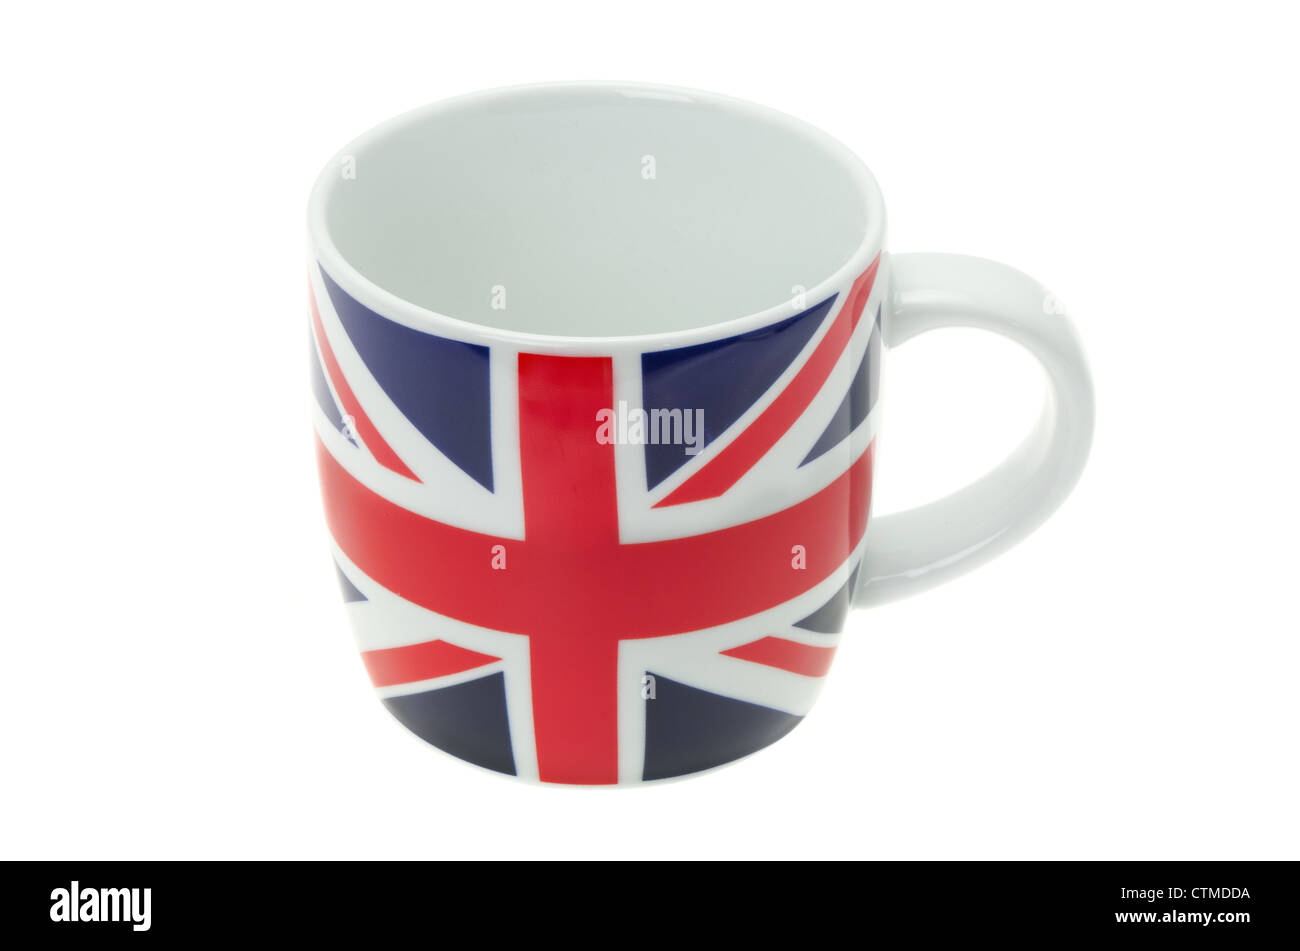 A mug decorated with a British flag 'Union Jack' - studio shot with a white background. Stock Photo